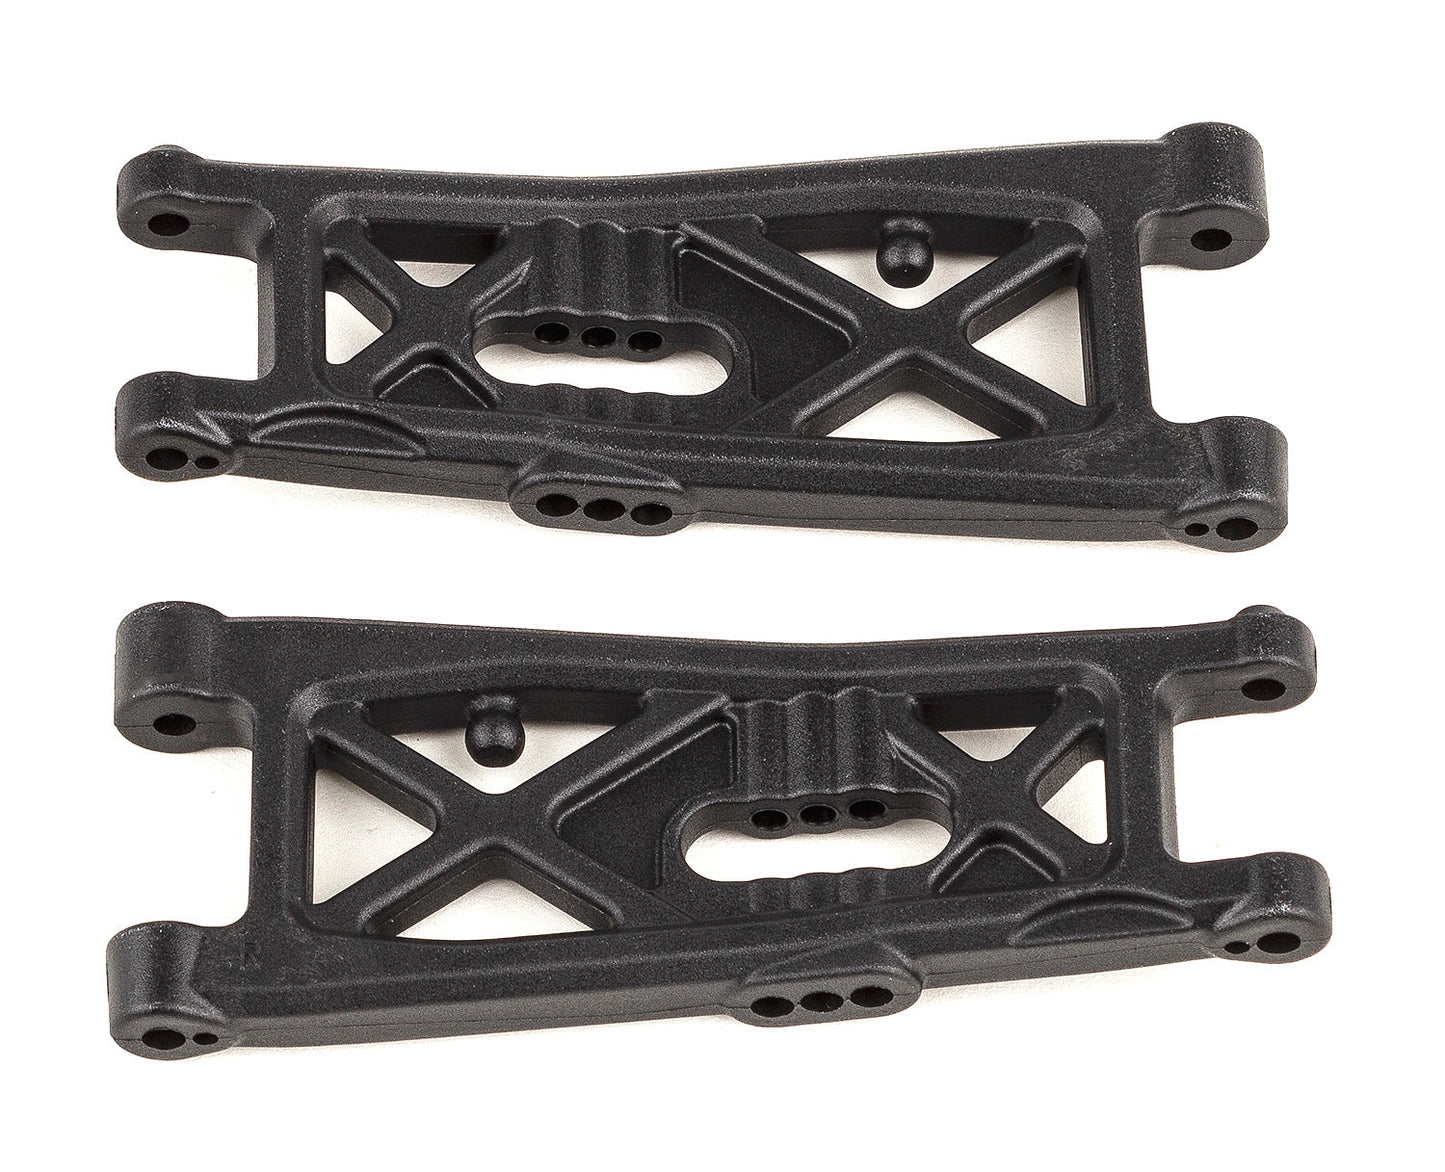 Team Associated - RC10B7 FT Front Suspension Arms, Carbon